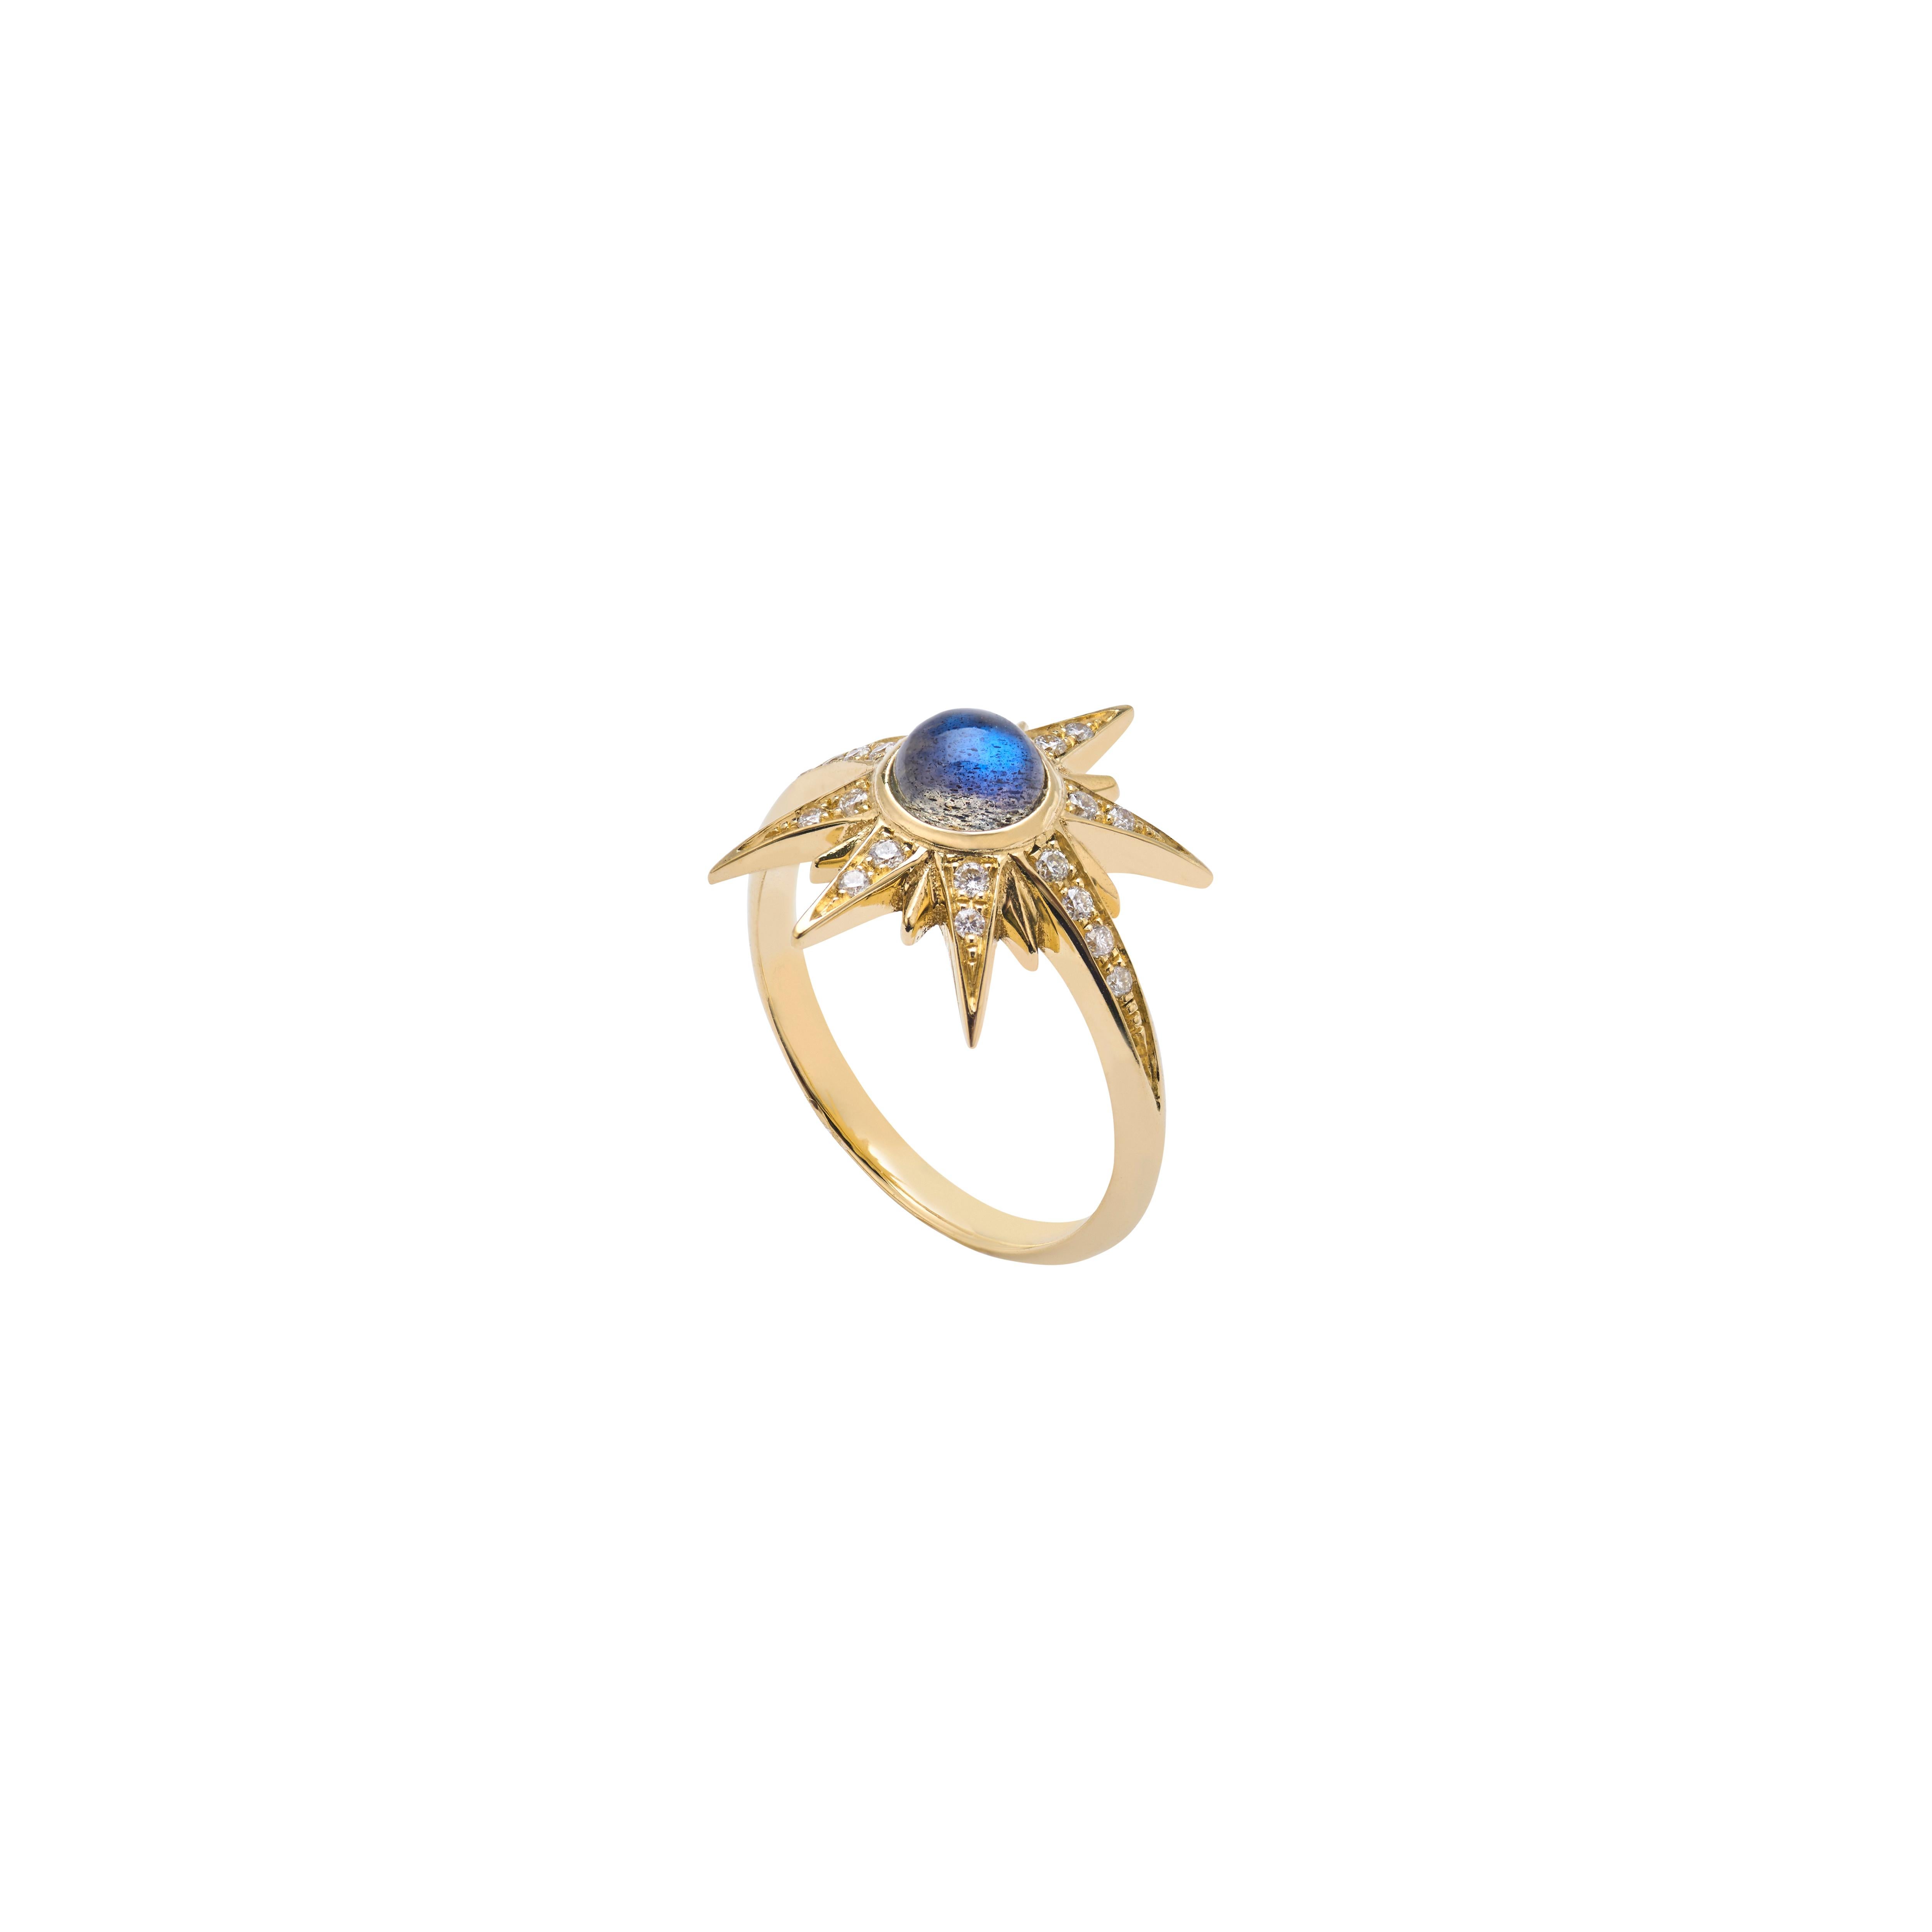 Ring sizes 46 available.
(Alternative sizes available on a made to order basis, with an estimated delivery time of 4-6 weeks)

18k Yellow Gold approx. 2.5gr, 20 Diamonds 0.10ct and 1 Labradorite 0.37ct

The Sun pieces are a presentation of the